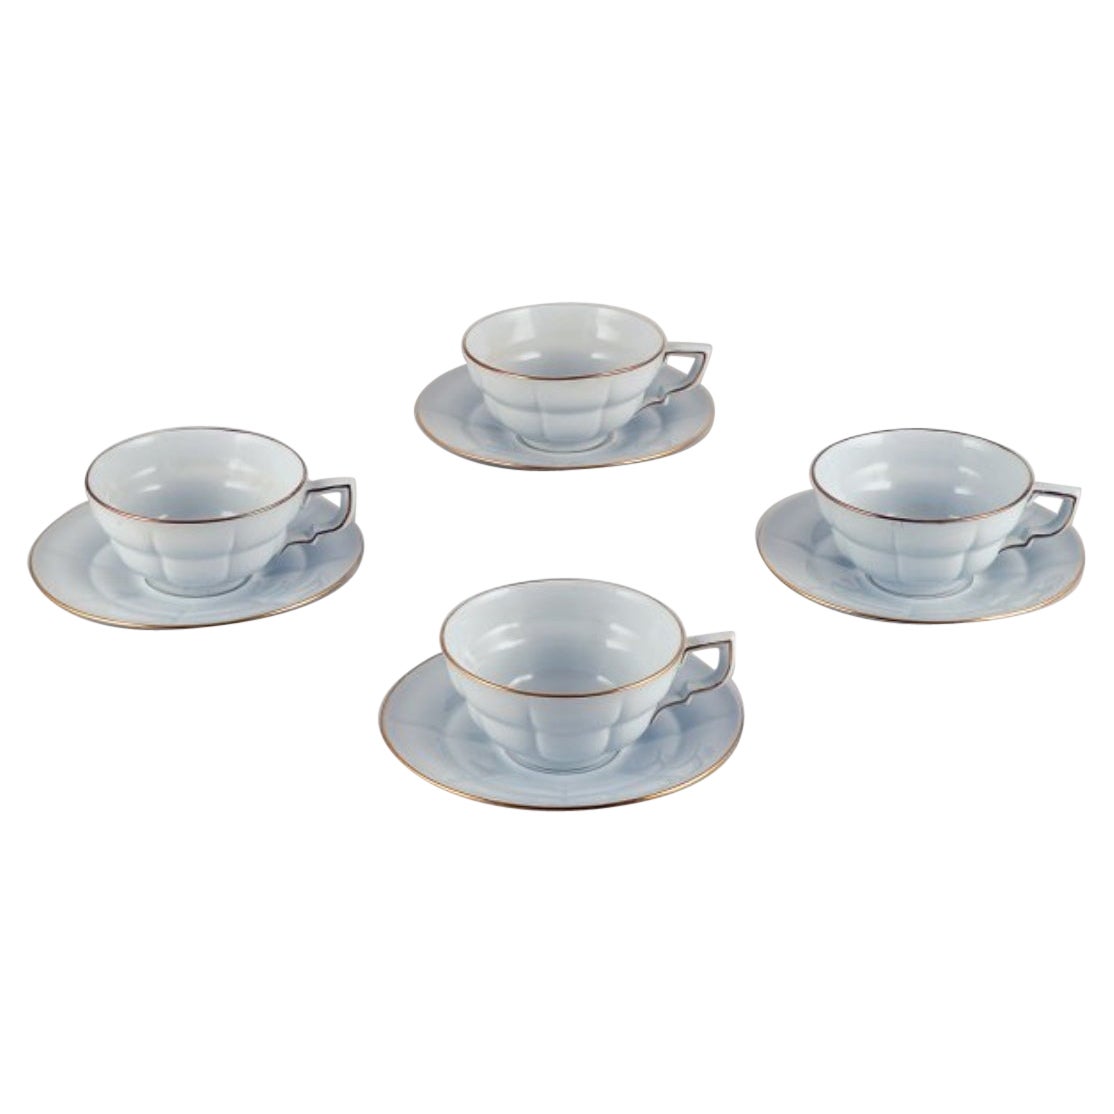 Gefle, Sweden. Set of four "Grand" Art Deco teacups with saucers. 1940s